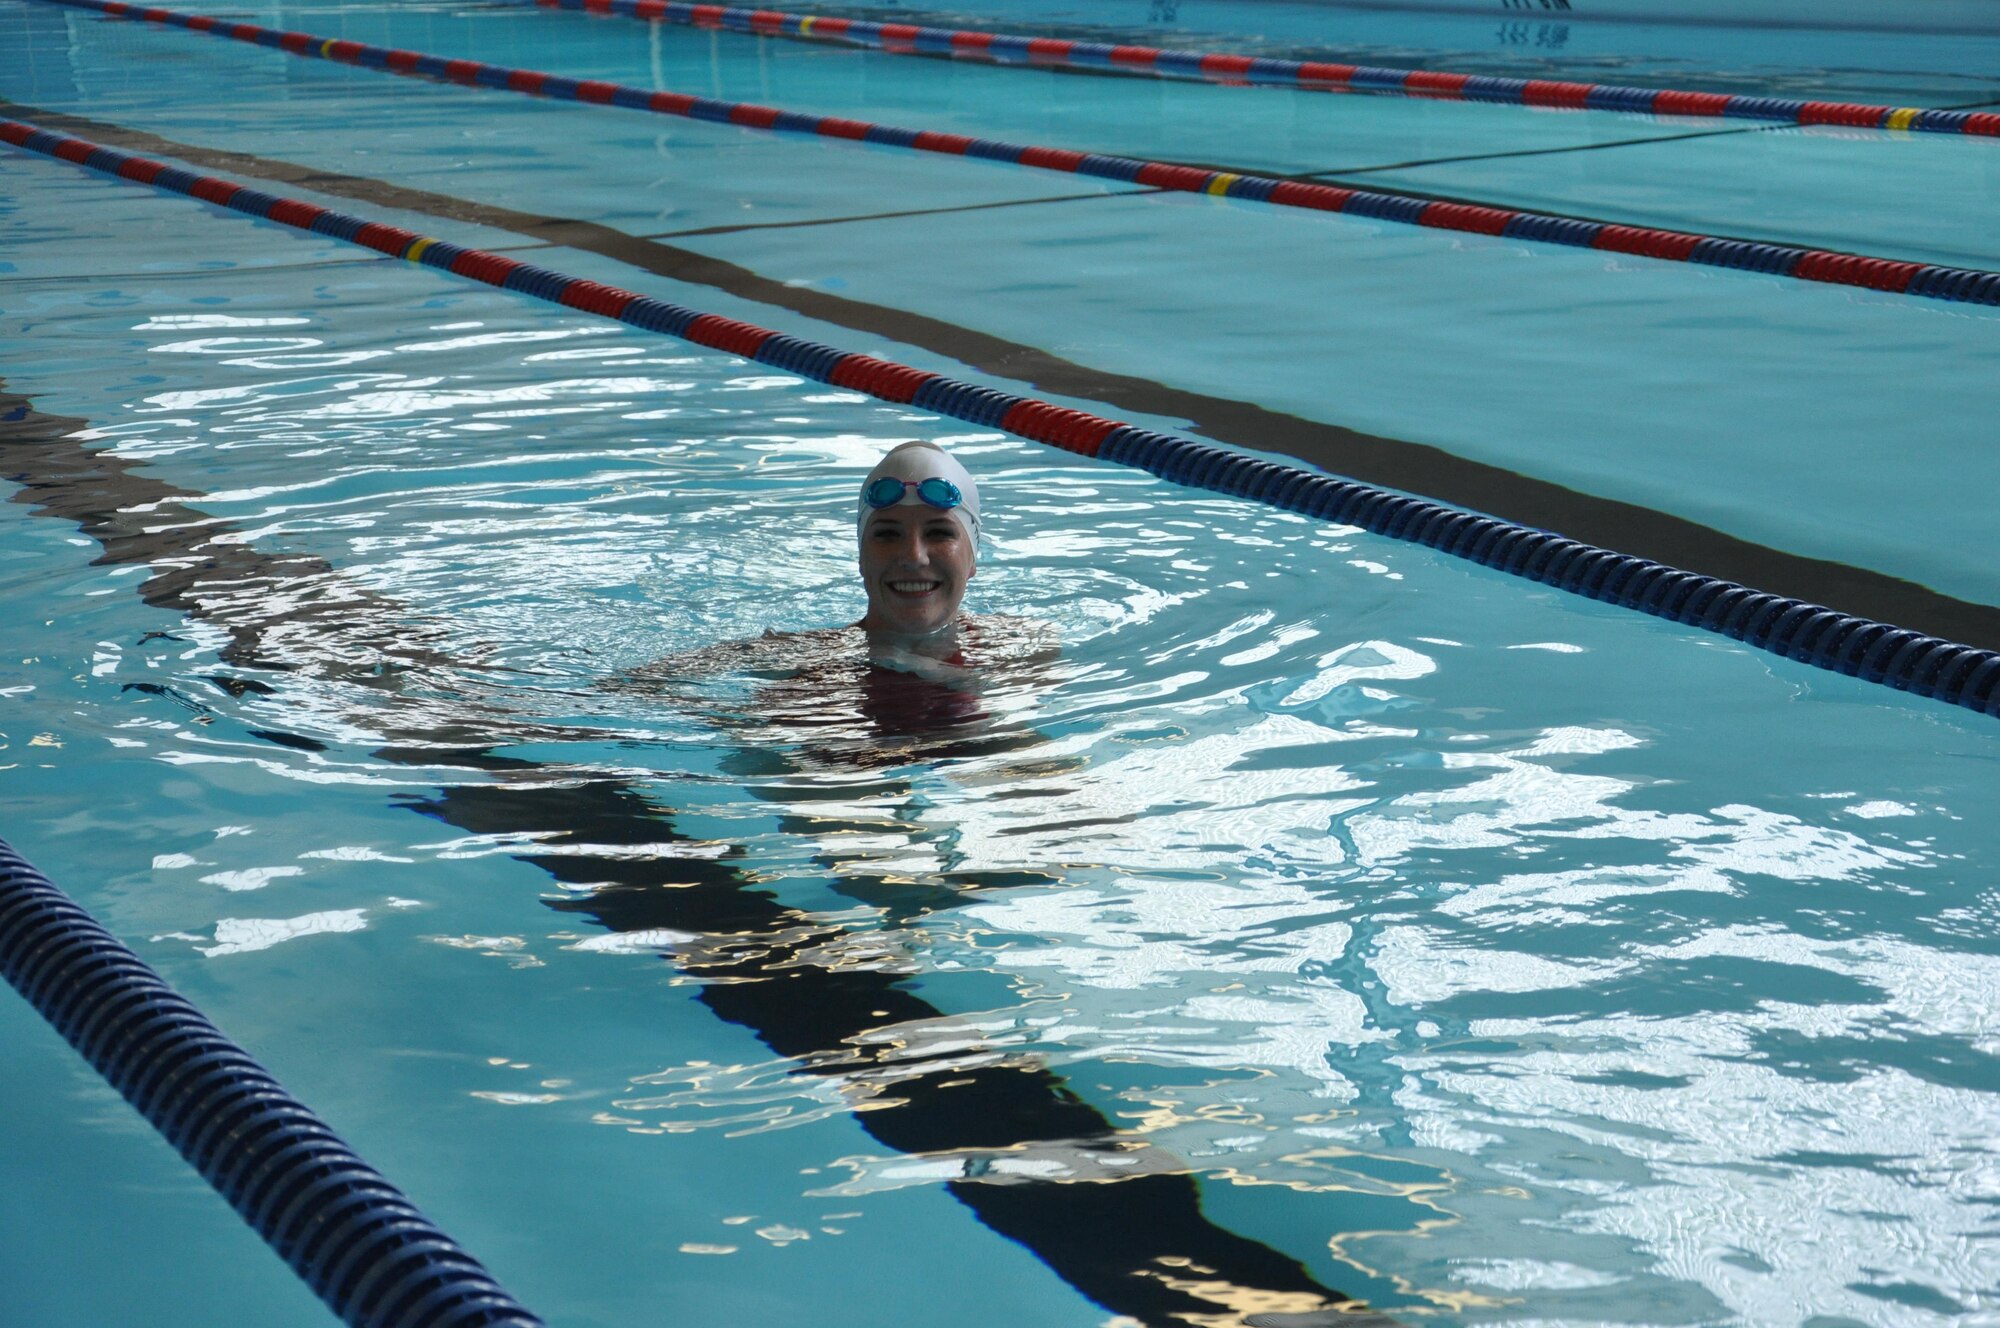 Staff Sgt. Lynley Mainous, 126th Intelligence Squadron in Springfield, Ohio, finishes a lap at the Dodge Fitness Center on Wright-Patterson AFB, Ohio, after it reopened April 10, 2017.  Mainous was one of the first patrons to use the upgraded pool, which had a new liner and deck installed.  The pool was closed for 2 1/2 months for the project. The liner has all of the required markings, a non-slip surface and is more ascetically pleasing. The surrounding deck took care of problem areas and safety hazards like standing water, missing or chipped tiles and lime and calcium build-up. (U.S. Air Force photo/Jim Mitchell)